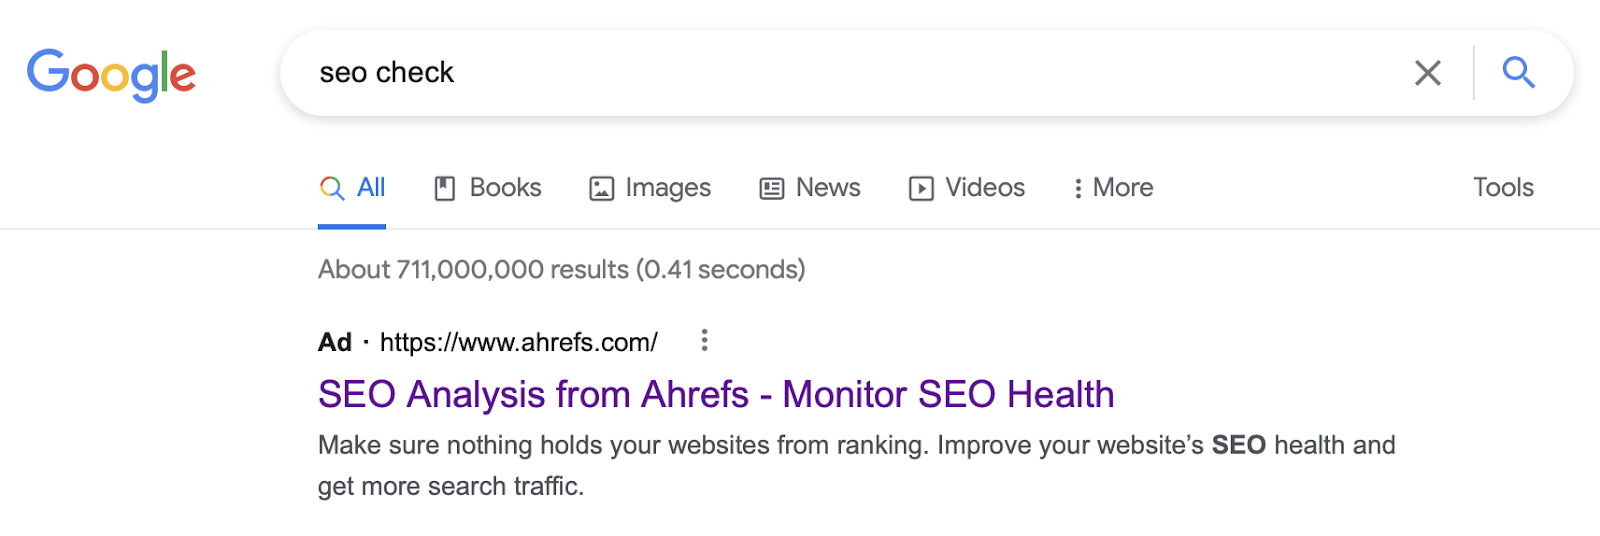 Example PPC ad in Google from Ahrefs